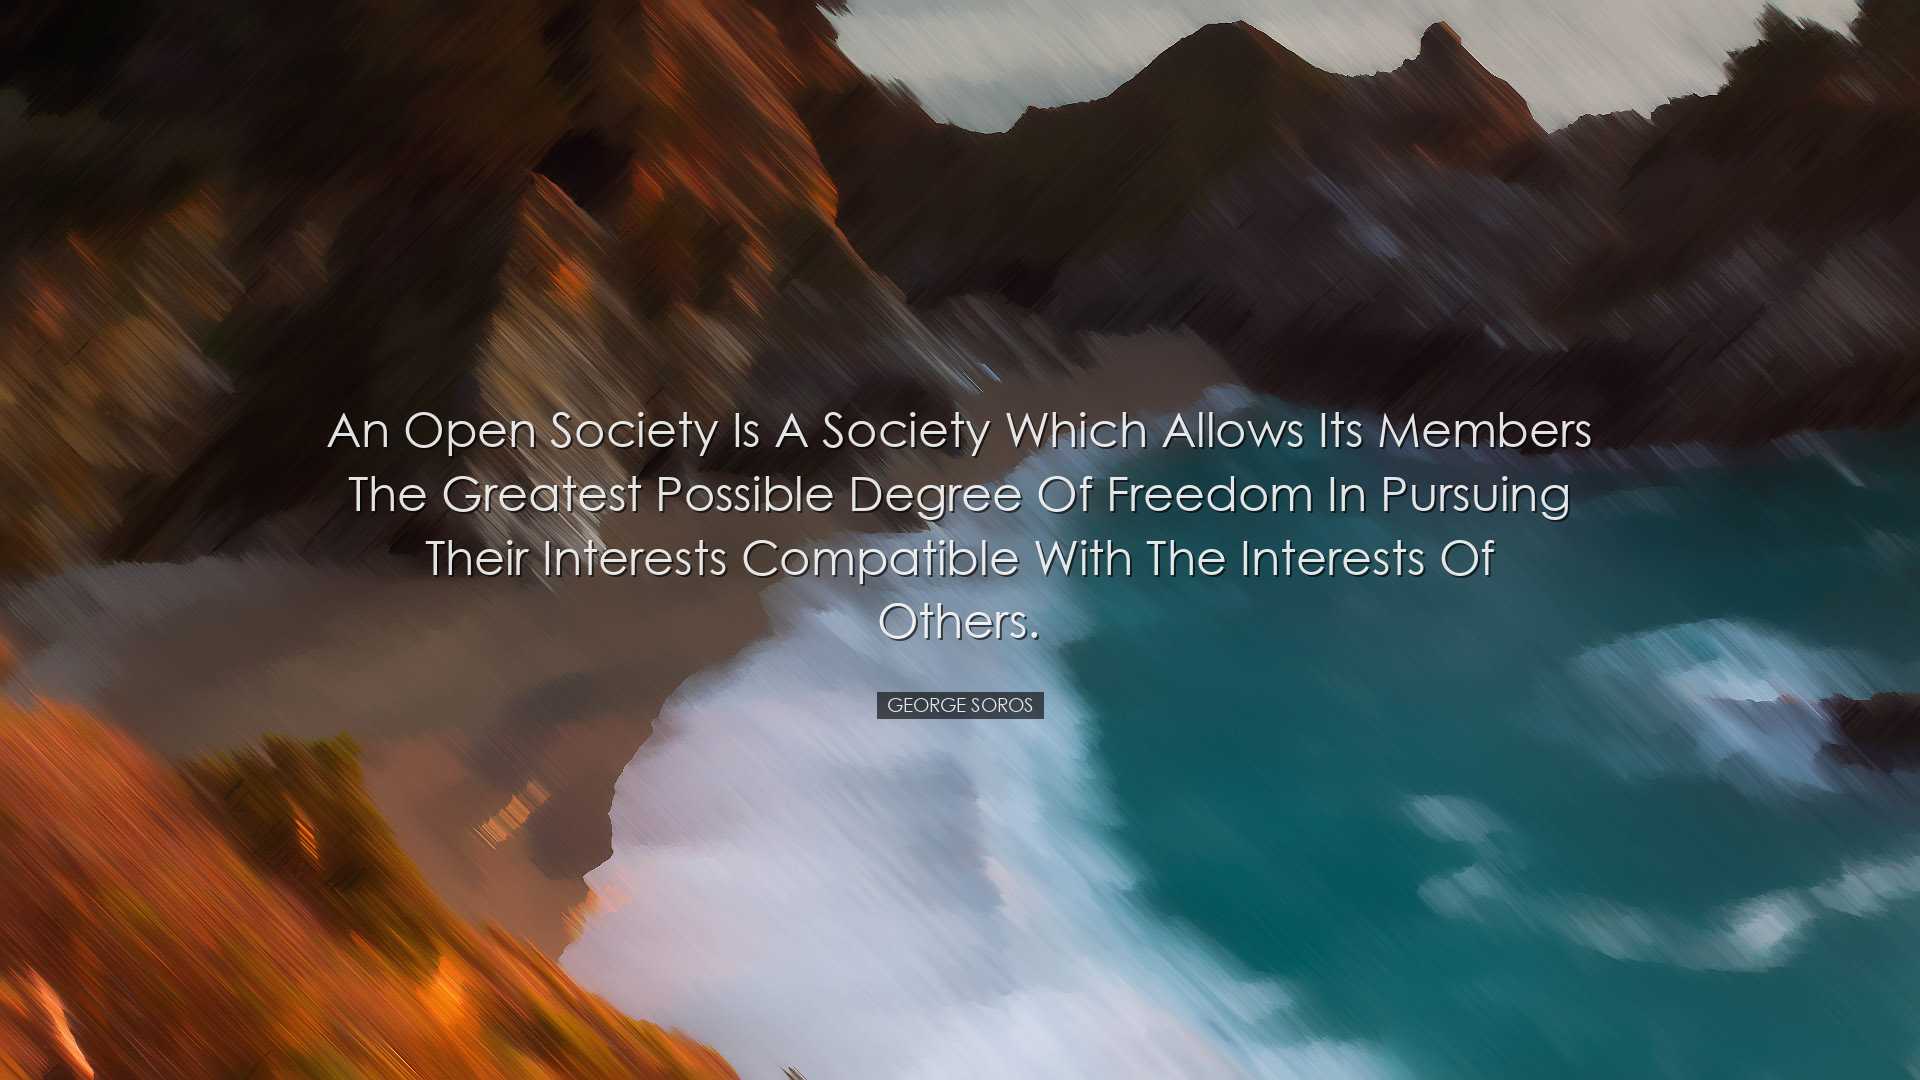 An open society is a society which allows its members the greatest